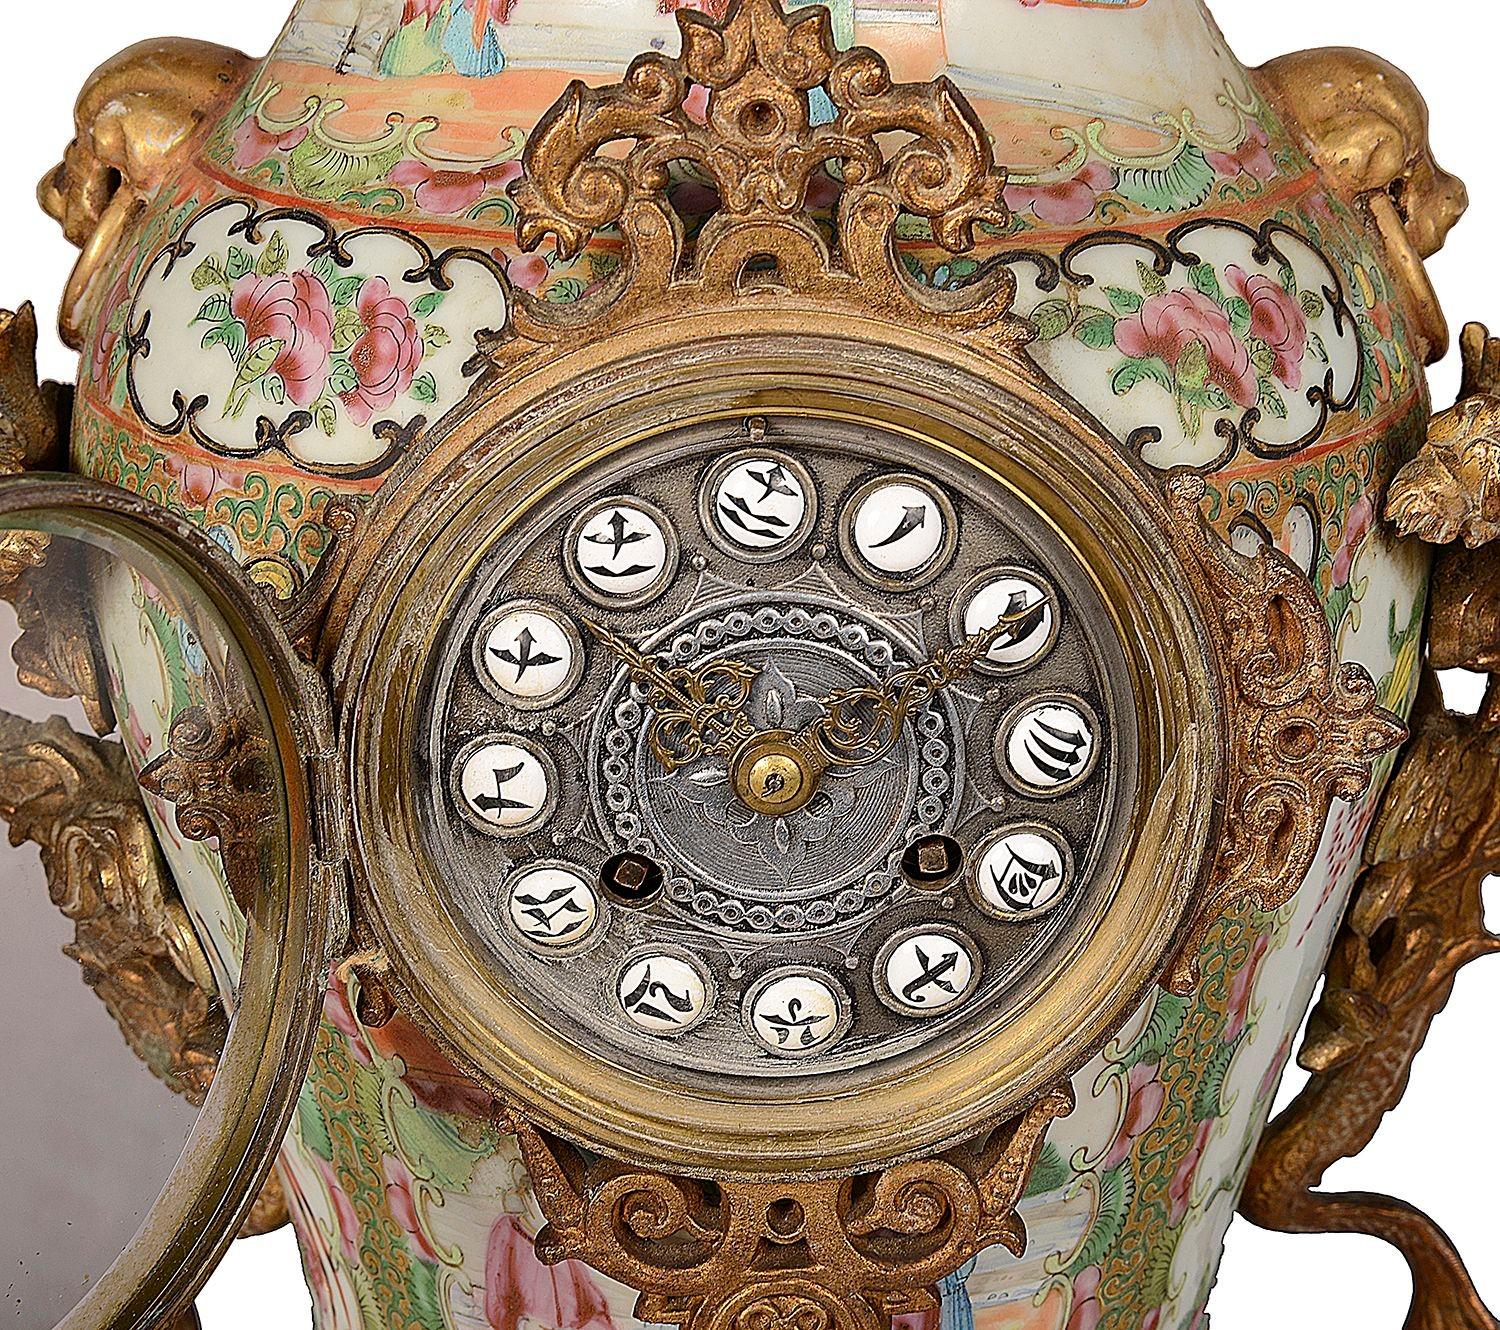 A very dramatic and decorative 19th Century Chinese Rose Medallion porcelain clock set. having wonderful gilded ormolu mounts, with mythical dragons handles and raised on hardwood style bases. The clock has an eight day striking hourly movement with